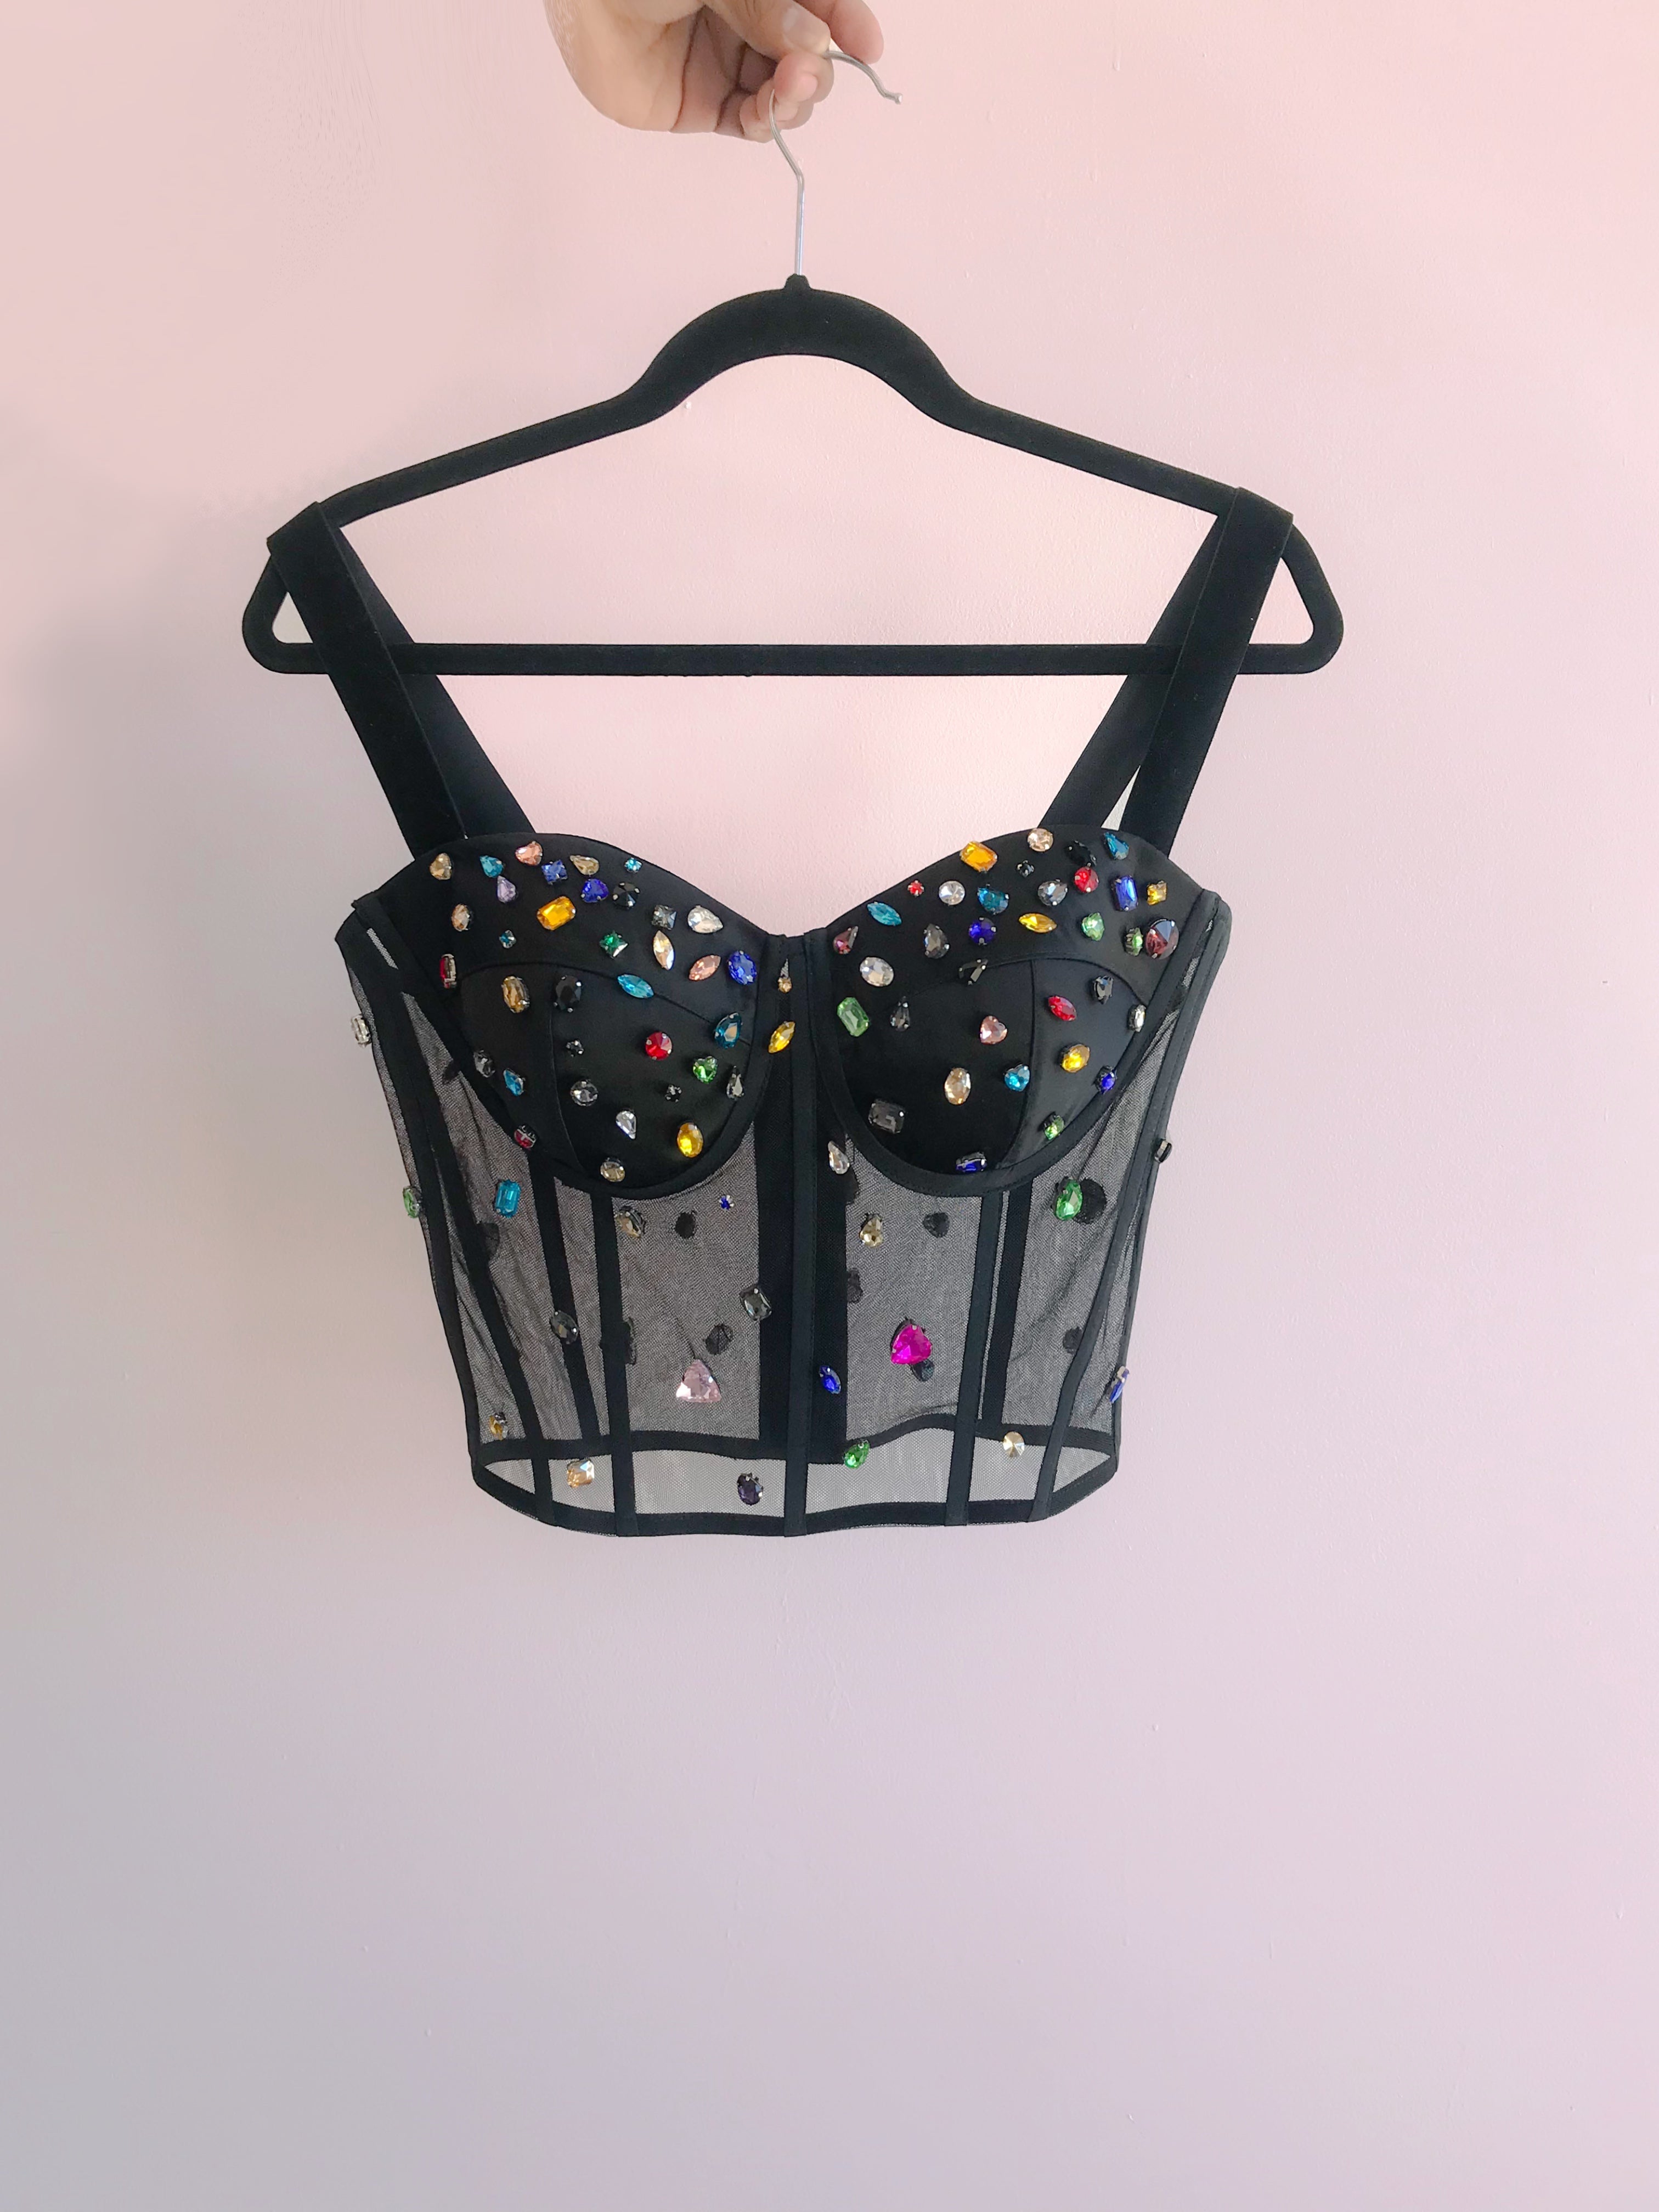 Casiopea Black Short Bustier Removable Straps Size 8 Cup D IMMEDIATE SHIPPING/DELIVERY